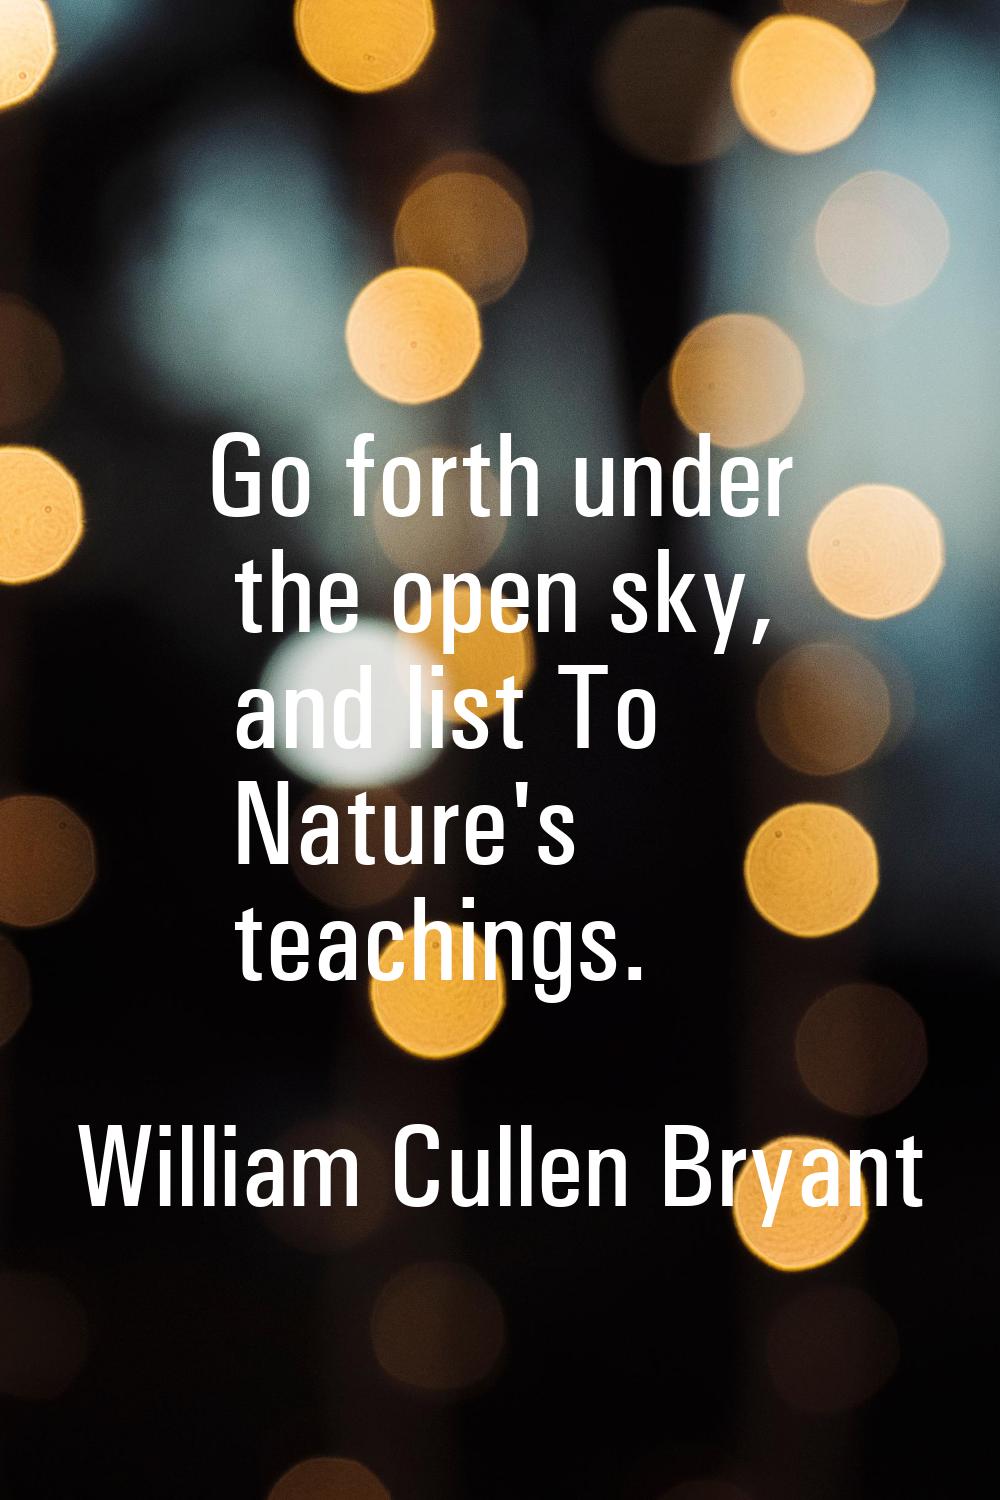 Go forth under the open sky, and list To Nature's teachings.